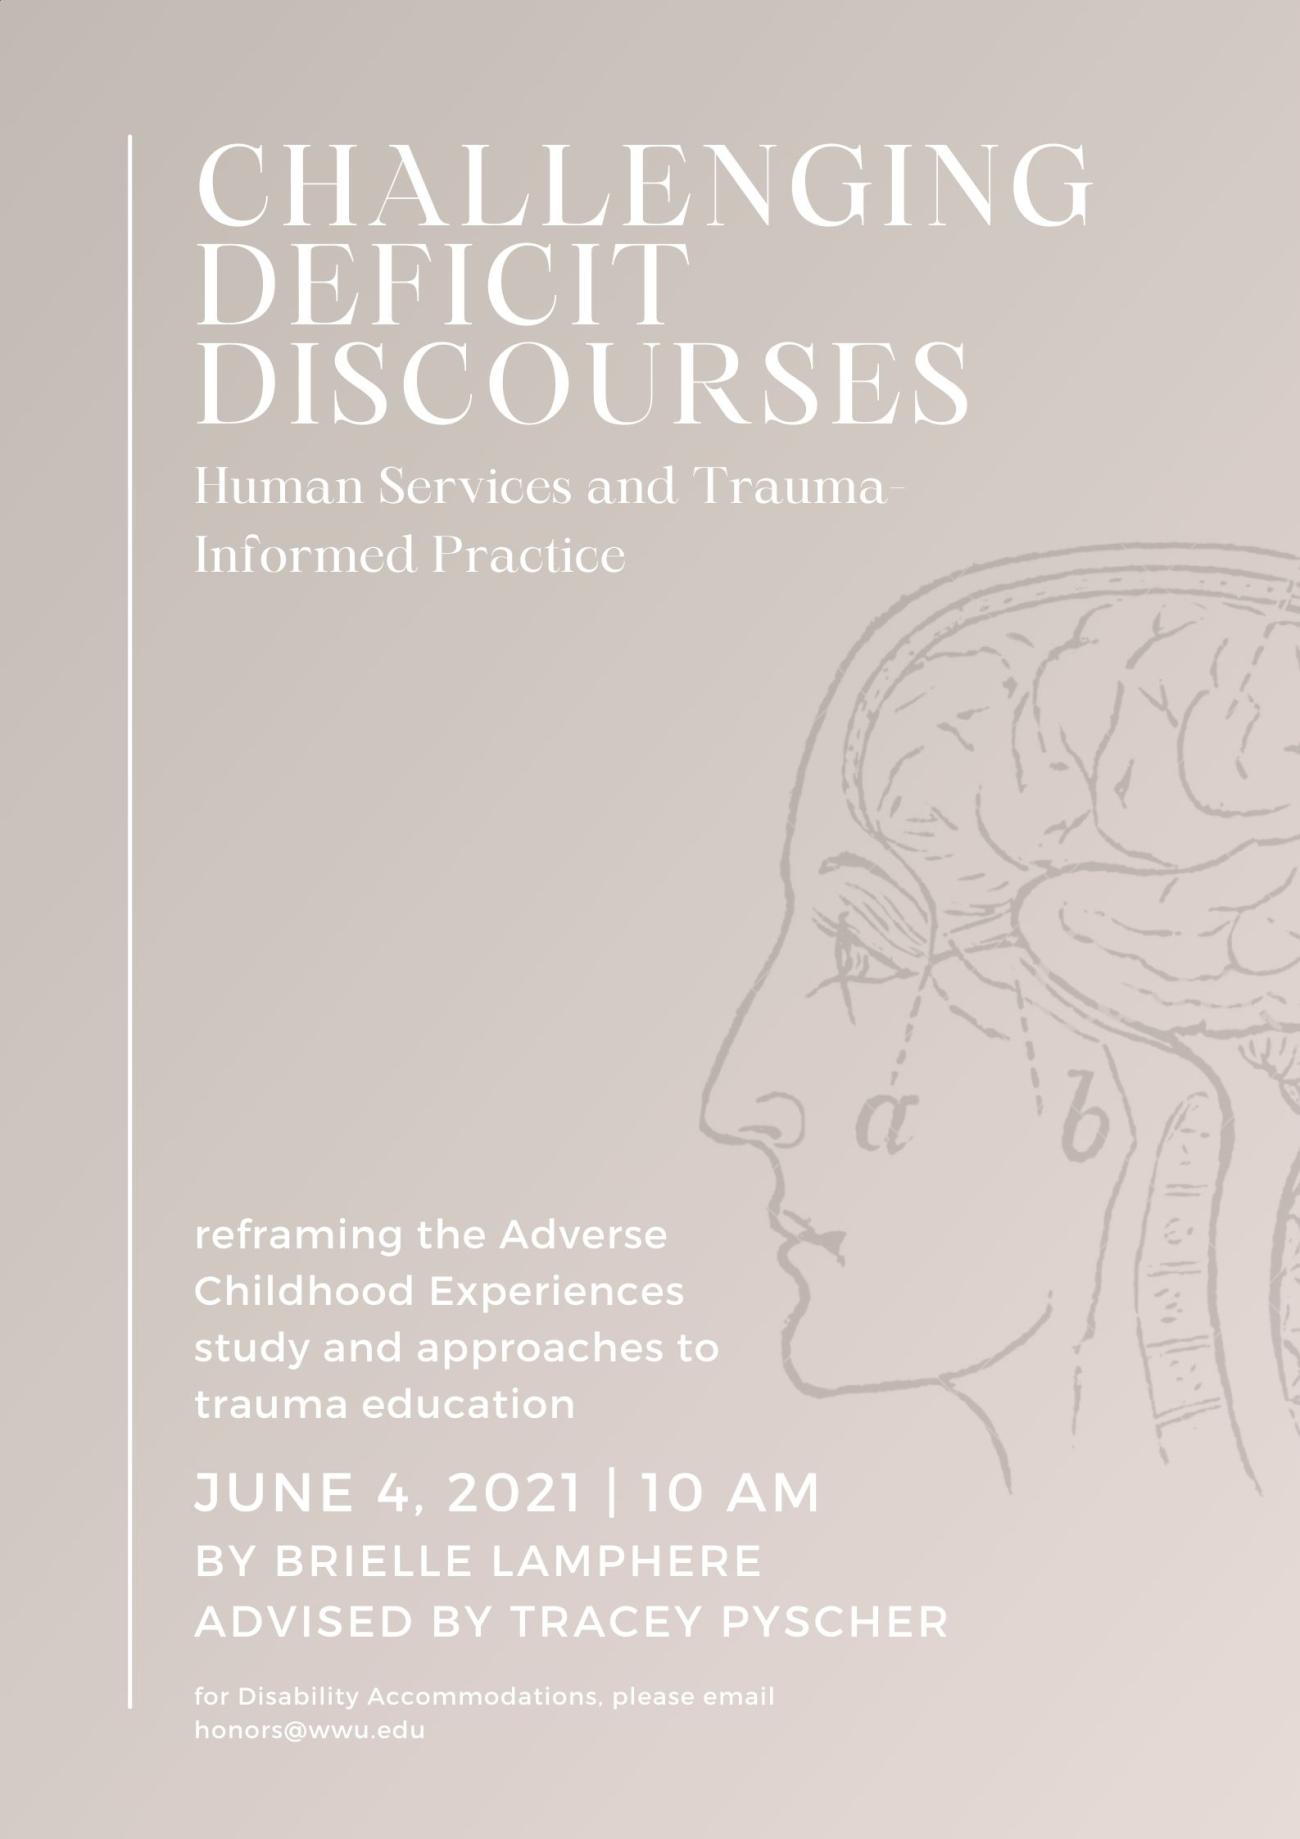 Light beige poster with an illustrated outline of a head in profile looking to the left with lines for brain drawn in. White text surrounding the head reads: "Challenging Deficit Discourses: Human Services and Trauma Informed Practice. Reframing the Adverse Childhood Experiences study and approaches to trauma education. June 4, 2021 at 10 AM. By Brielle Lamphere, advised by Dr. Tracey Pyscher. For disability accommodations please email honors@wwu.edu". 